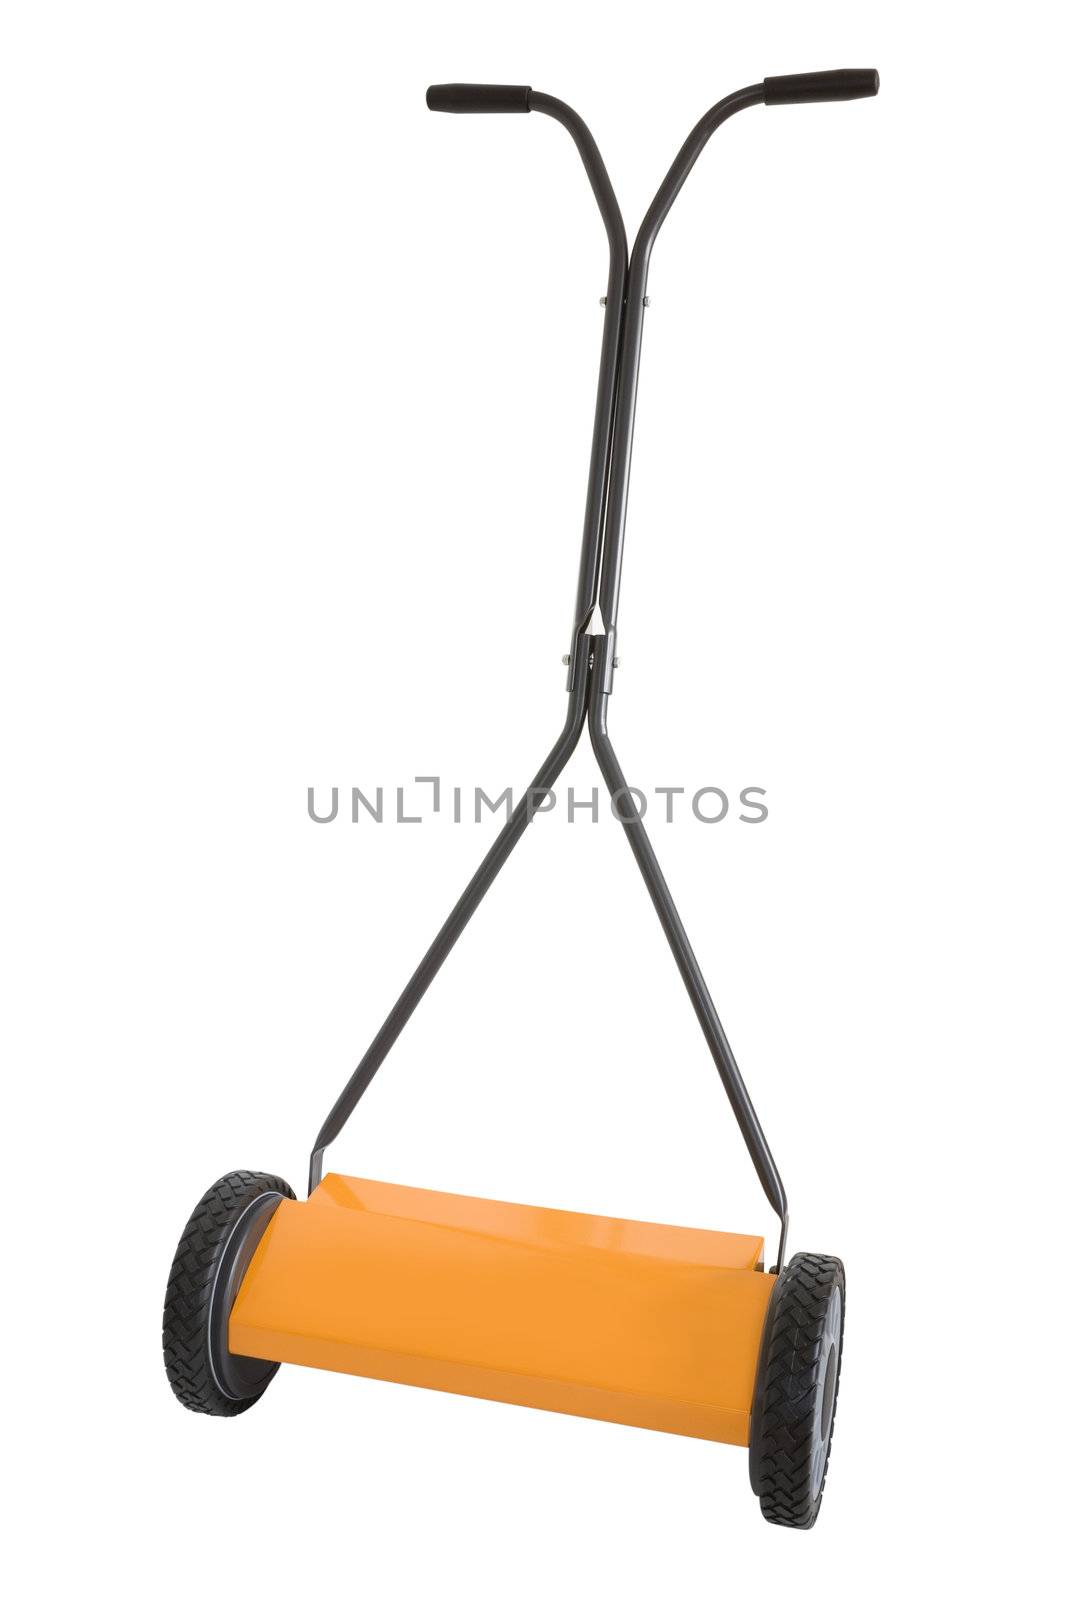 Hand push lawn raker isolated on a white background